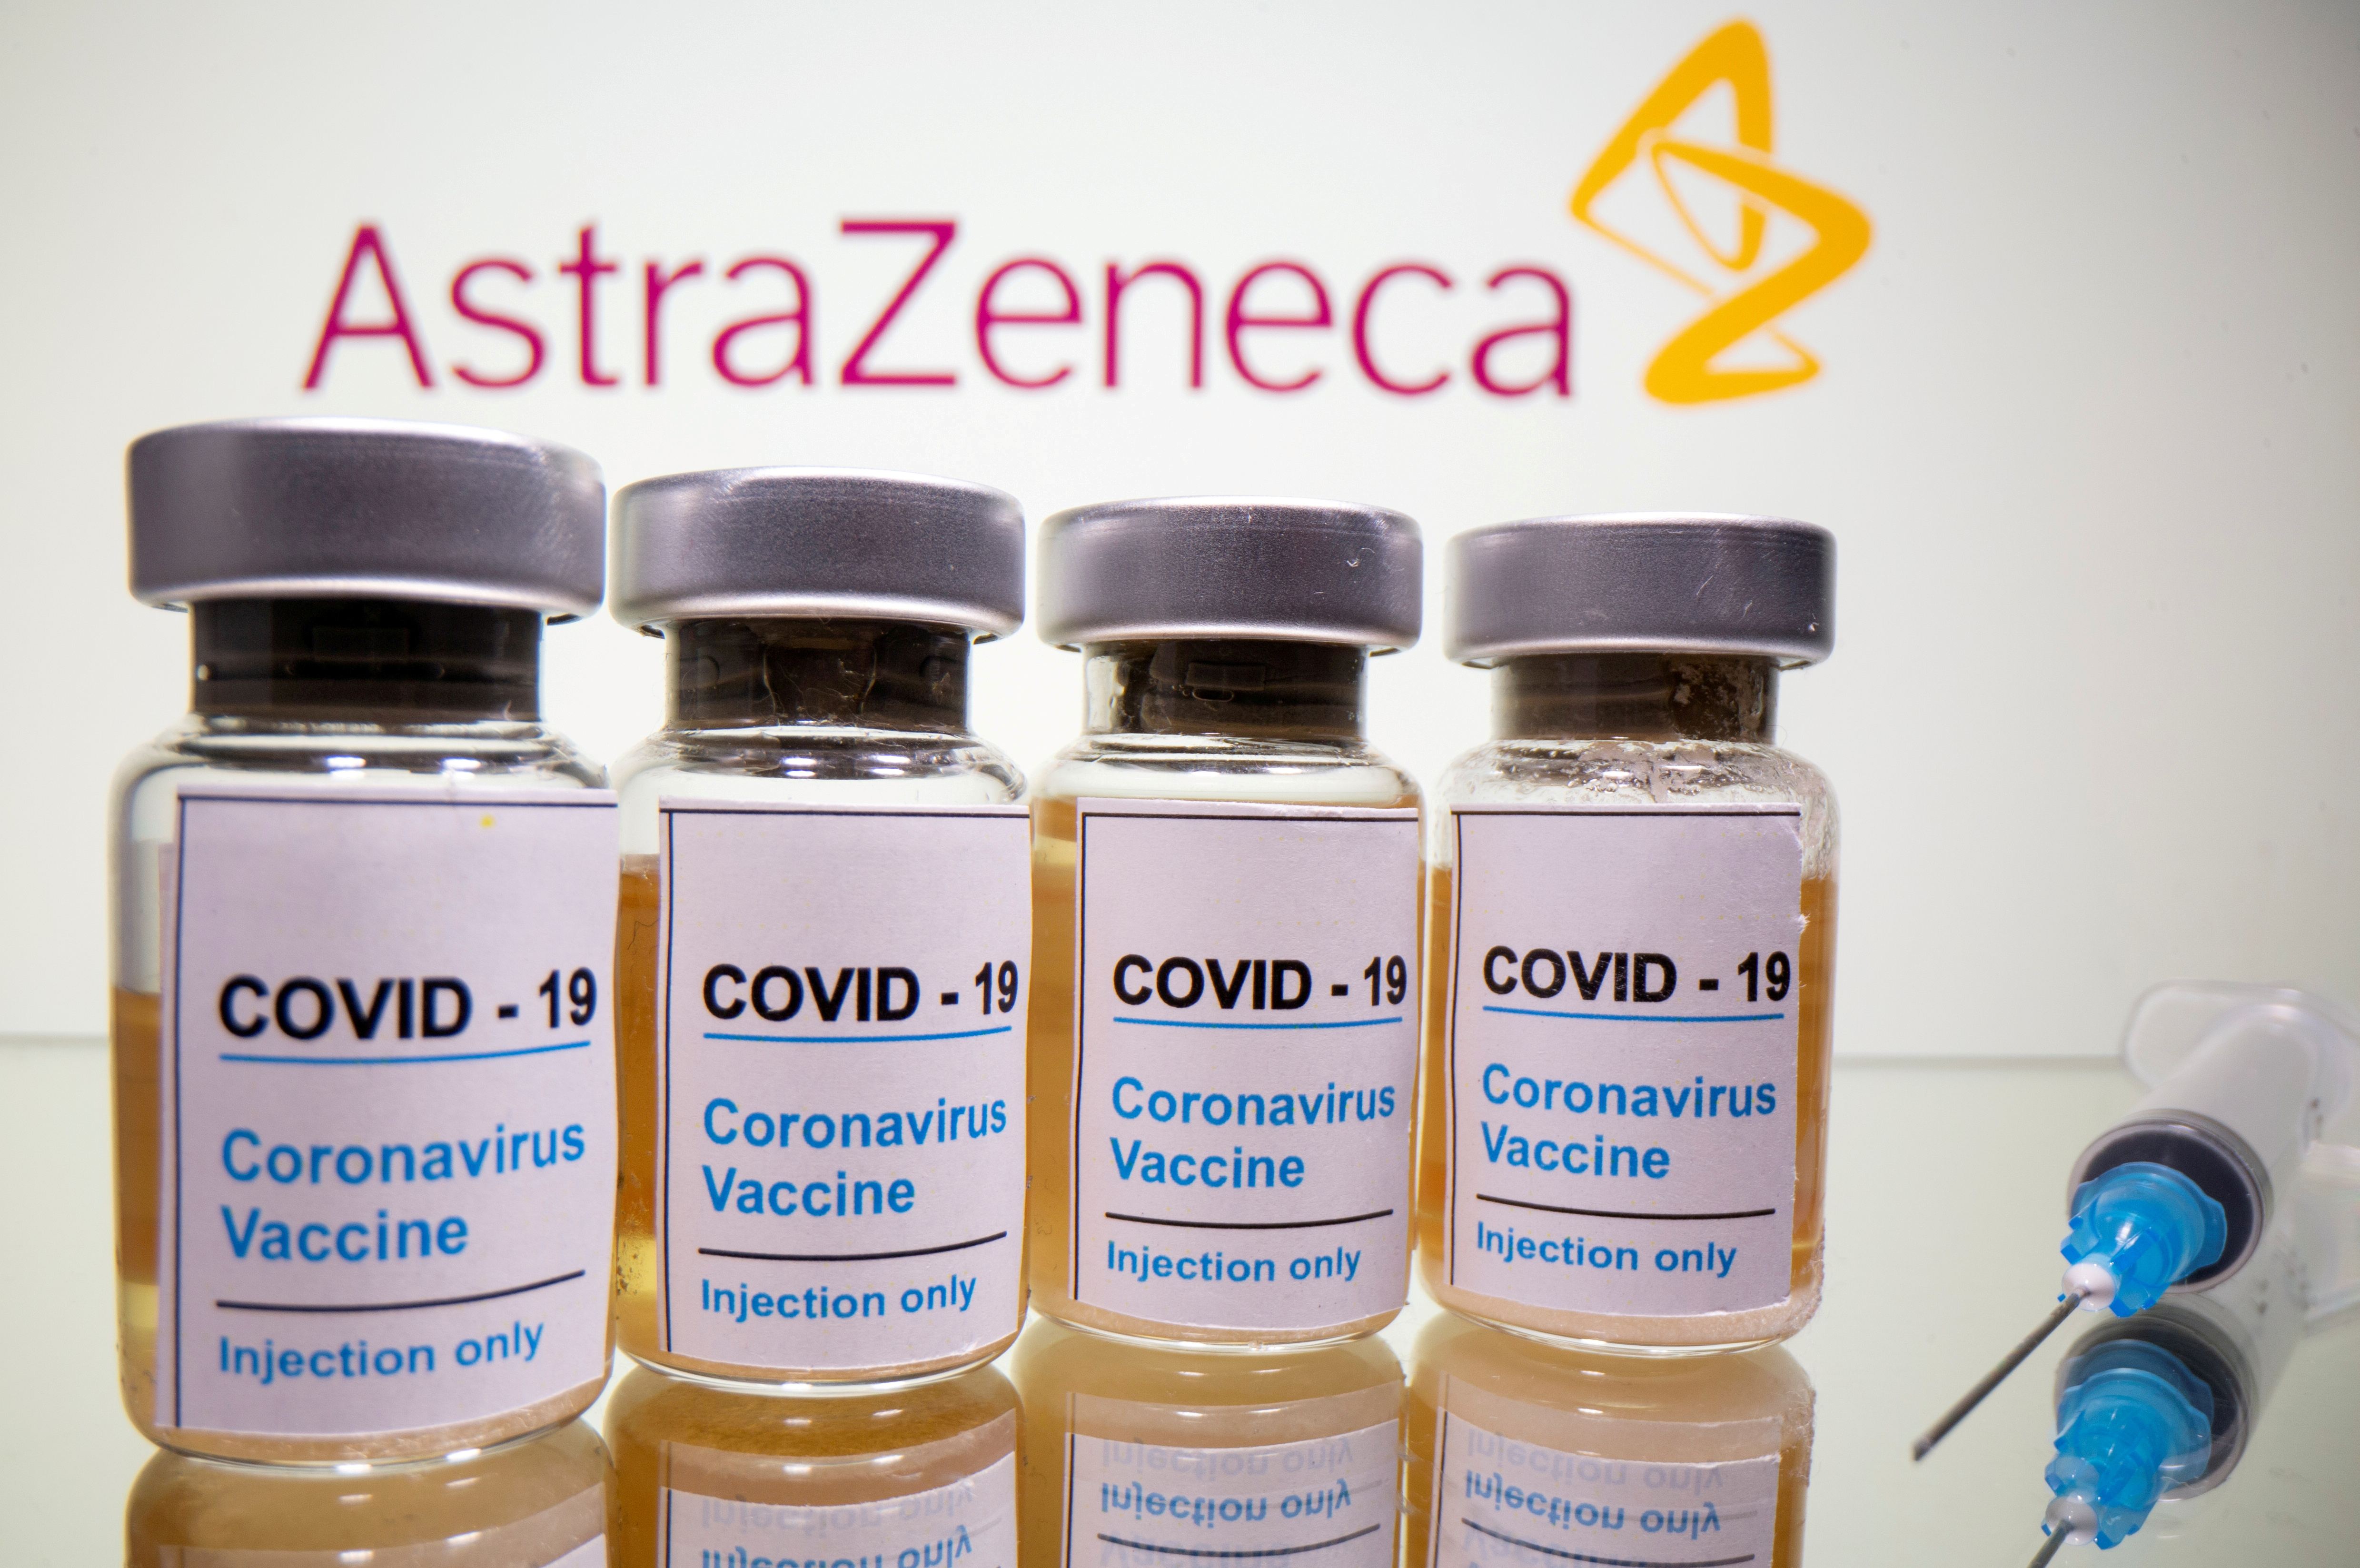 FILE PHOTO: FILE PHOTO: Vials and medical syringe are seen in front of AstraZeneca logo in this illustration